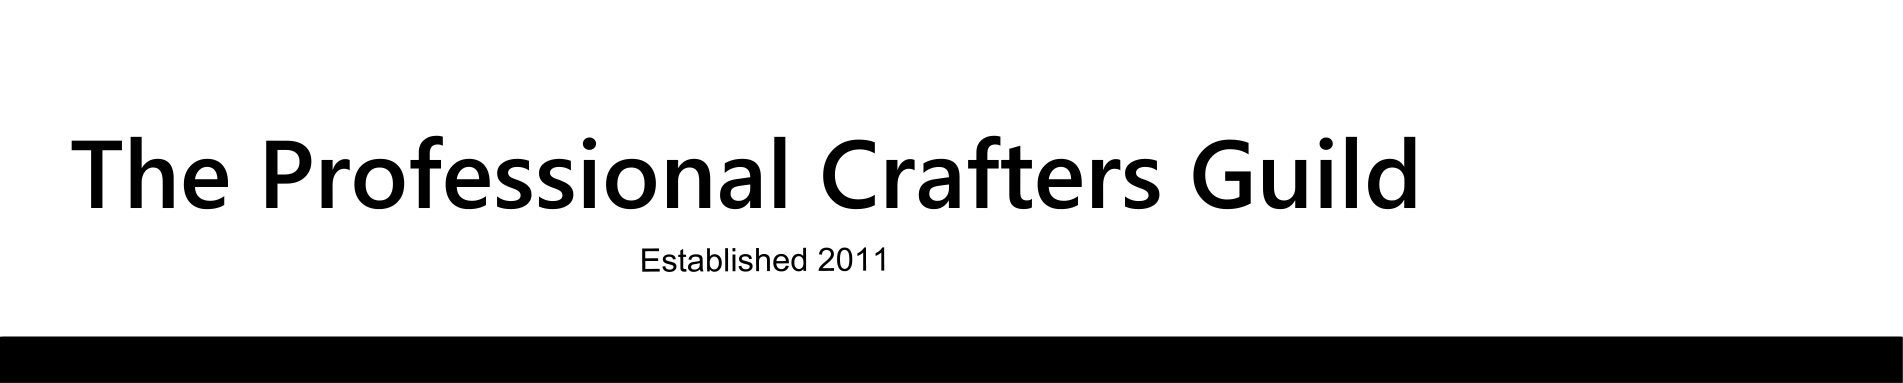 The Professional Crafters Guild